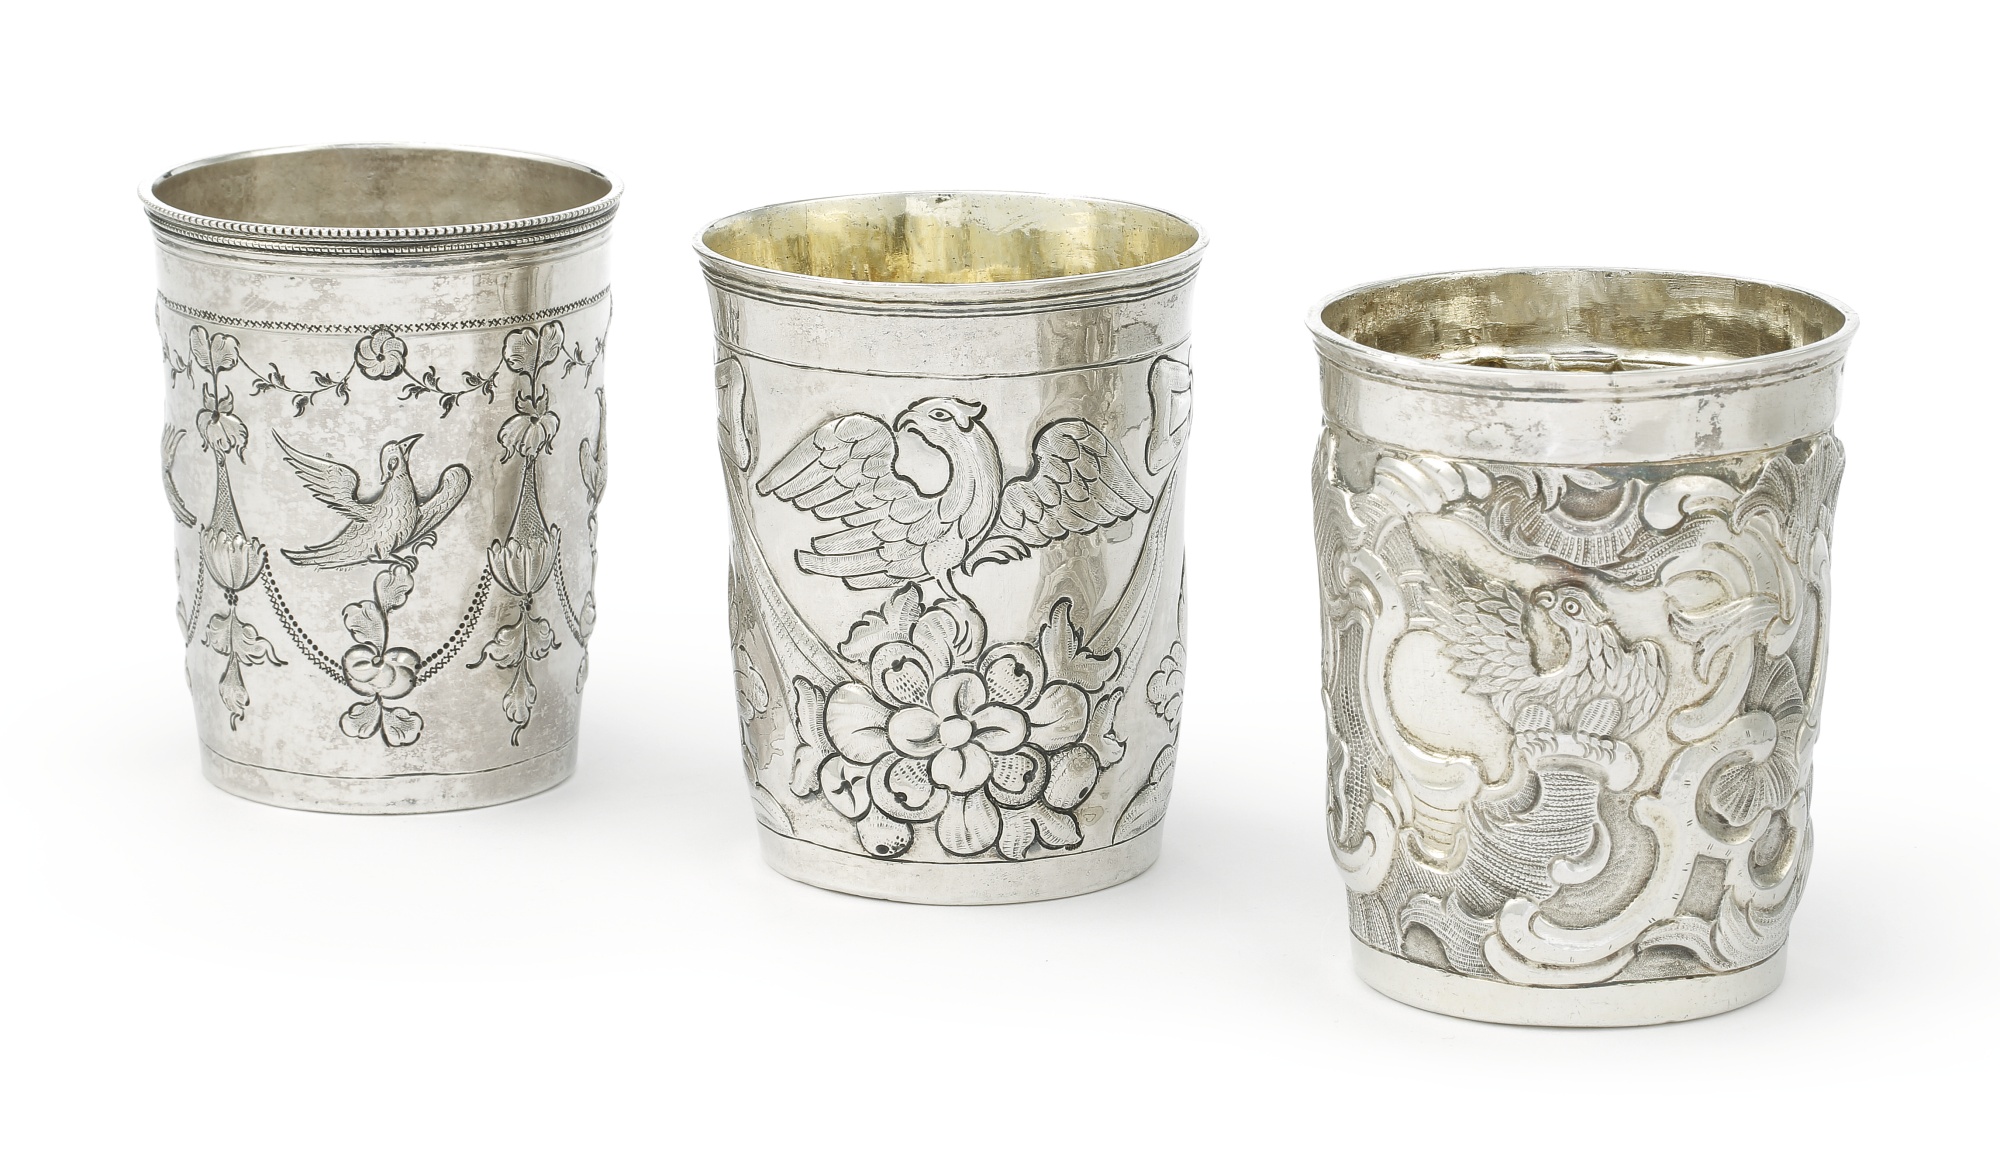 sothebys-fall-auctions-3-russian-silver-embossed-beakers-18th-c